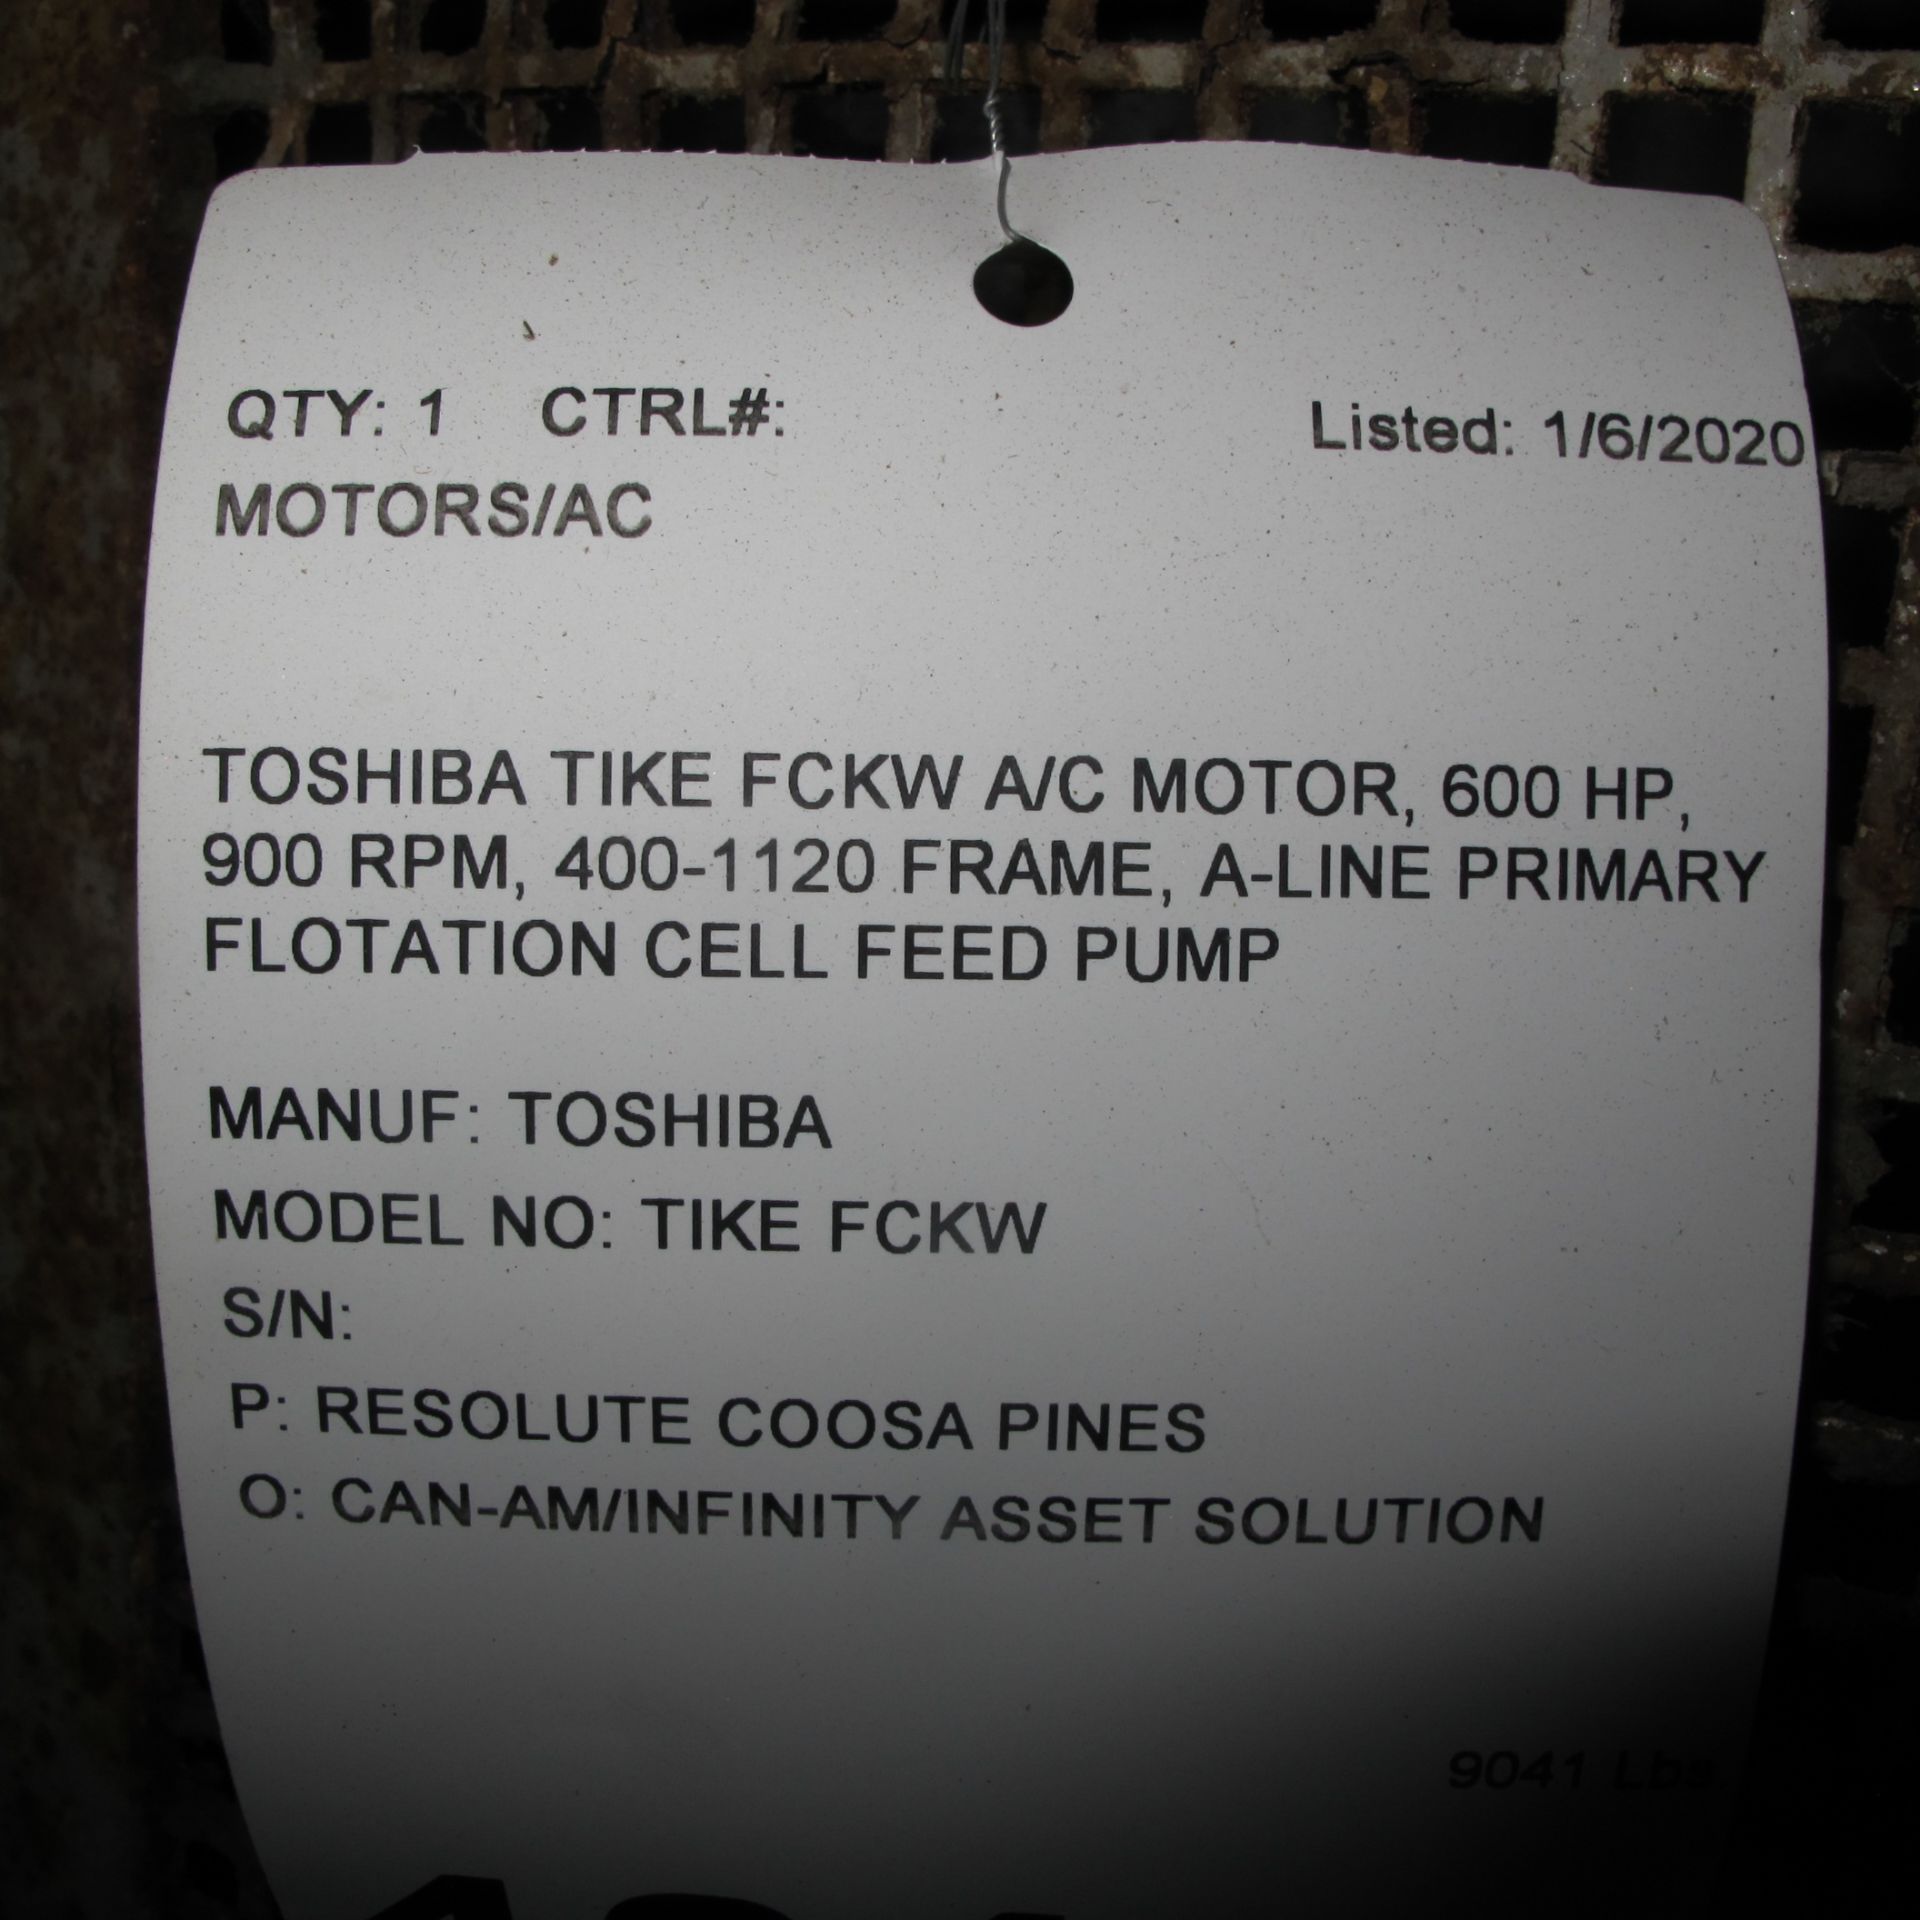 TOSHIBA TIKE FCKW A/C MOTOR, 600 HP, 900 RPM, 400-1120 FRAME, A-LINE PRIMARY FLOTATION CELL FEED - Image 3 of 3